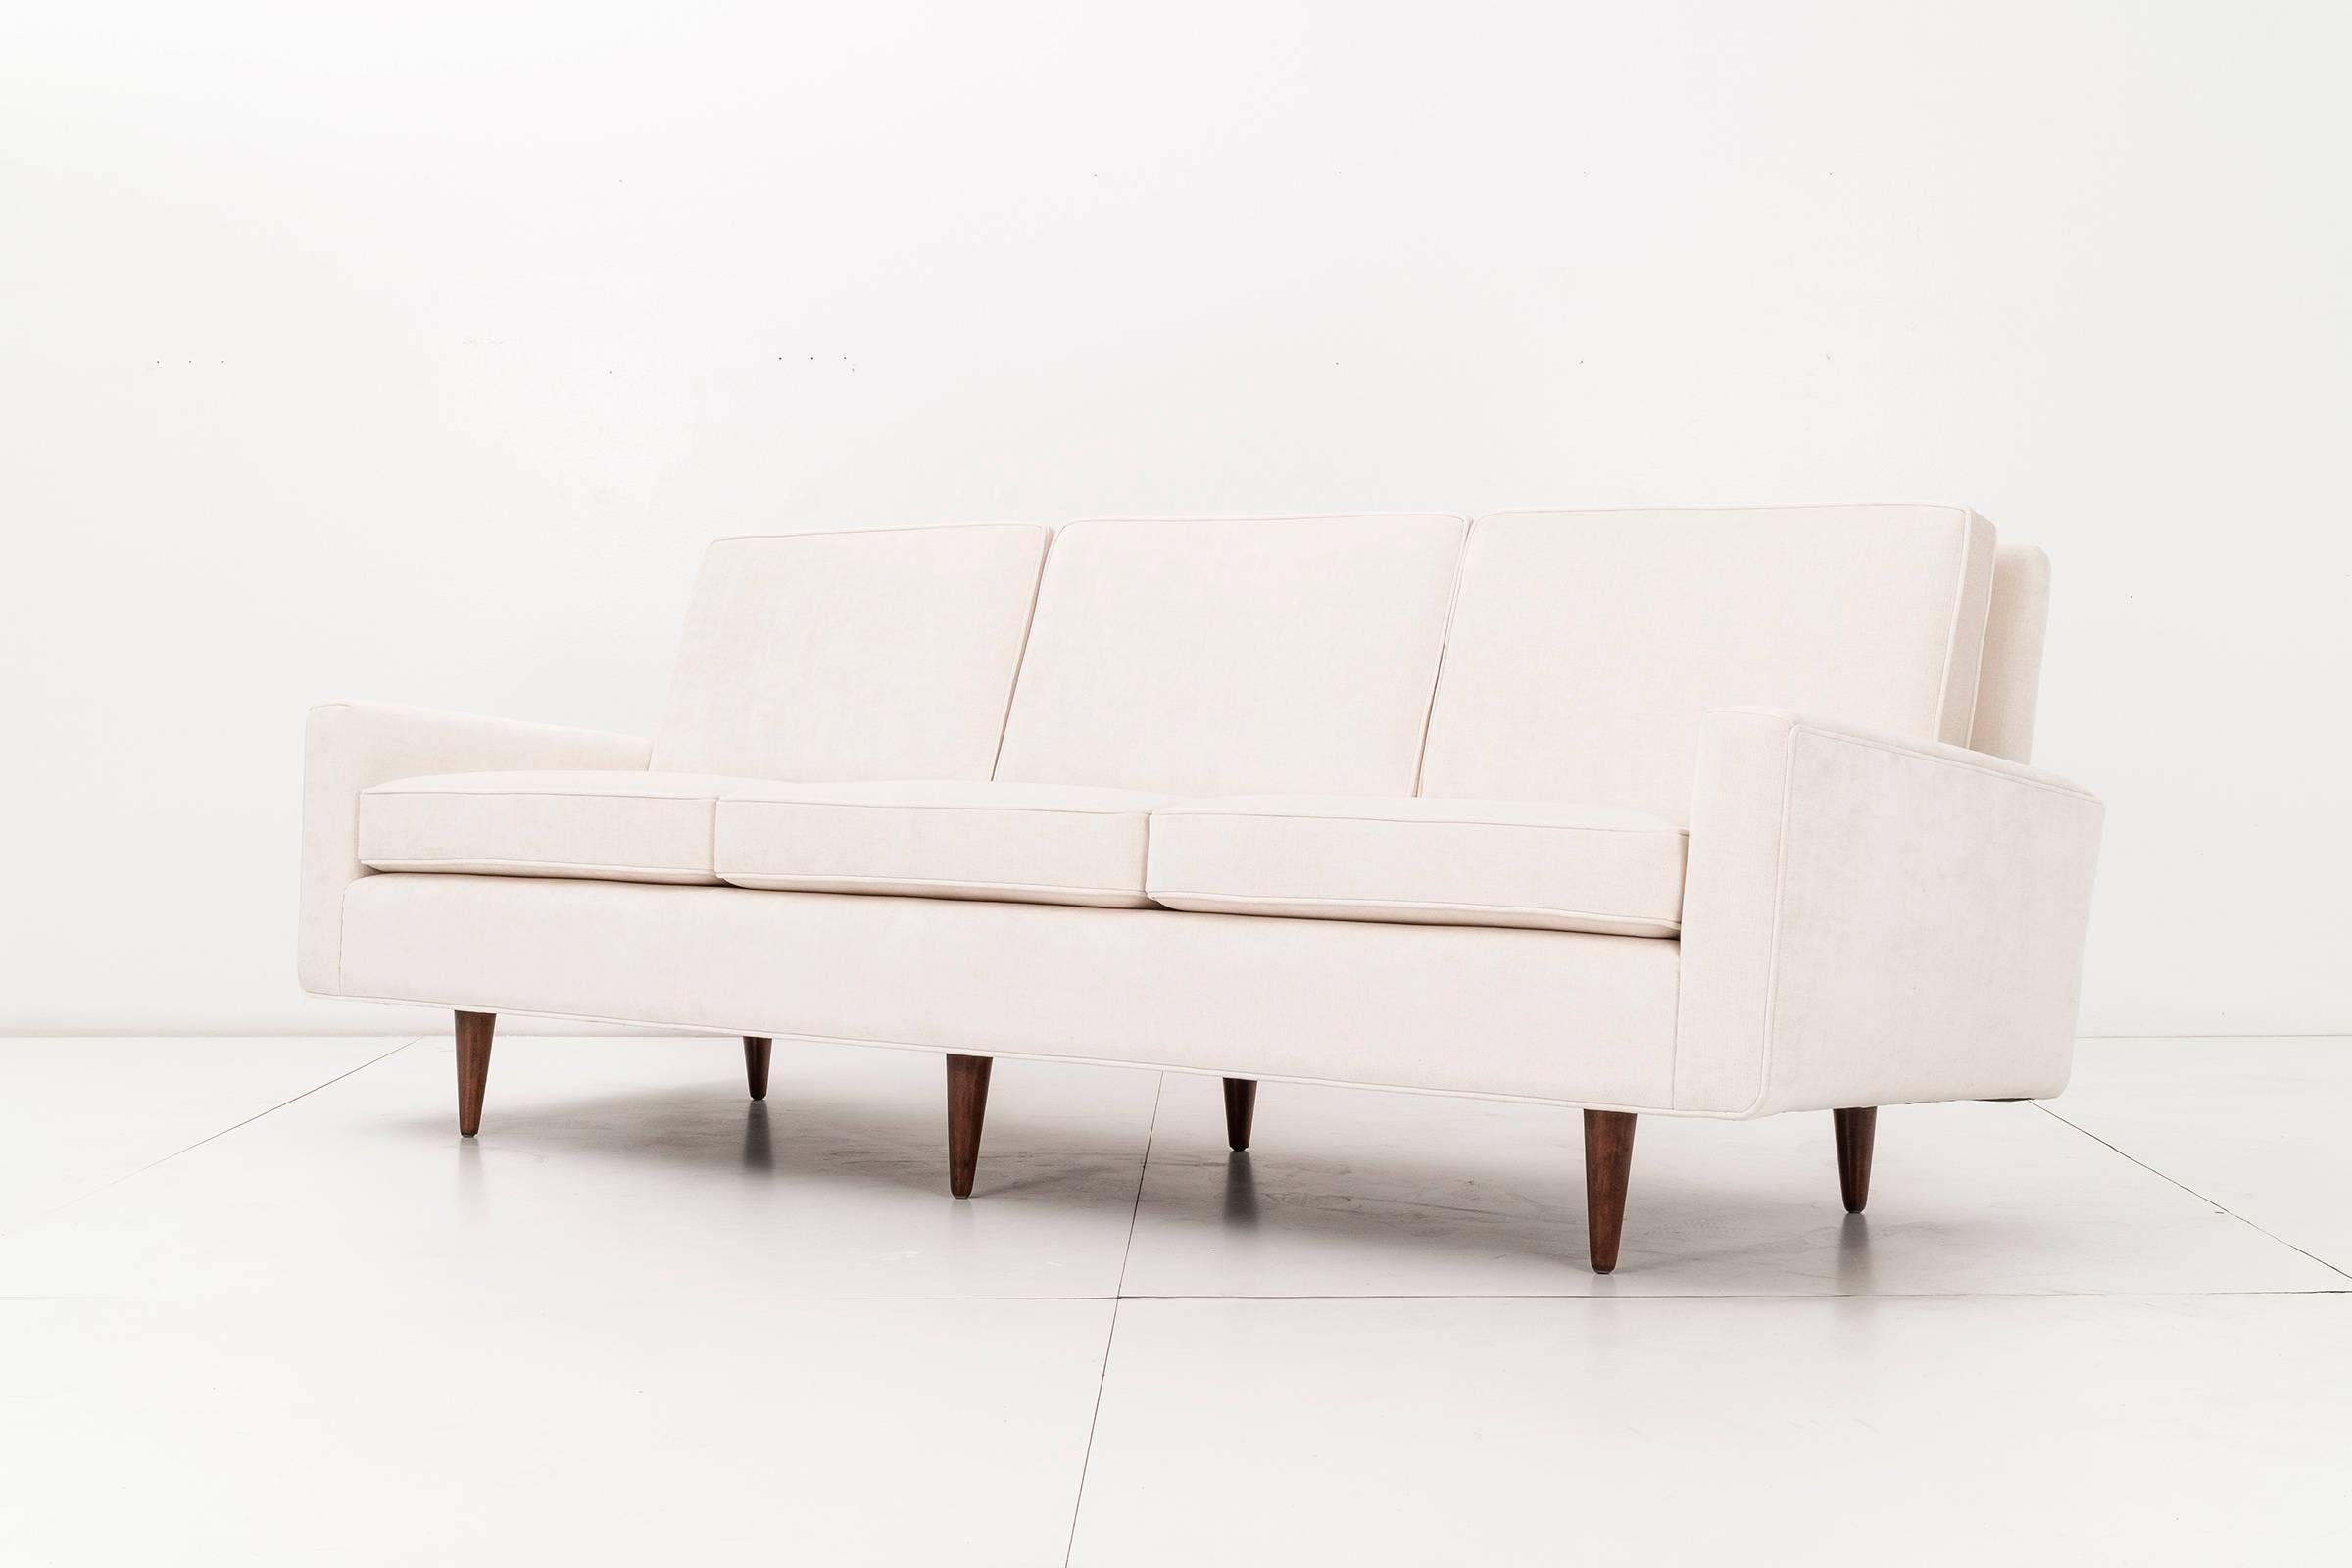 Early Florence Knoll sofa, reupholstered with great plains off-white weave and turned solid tapered legs.